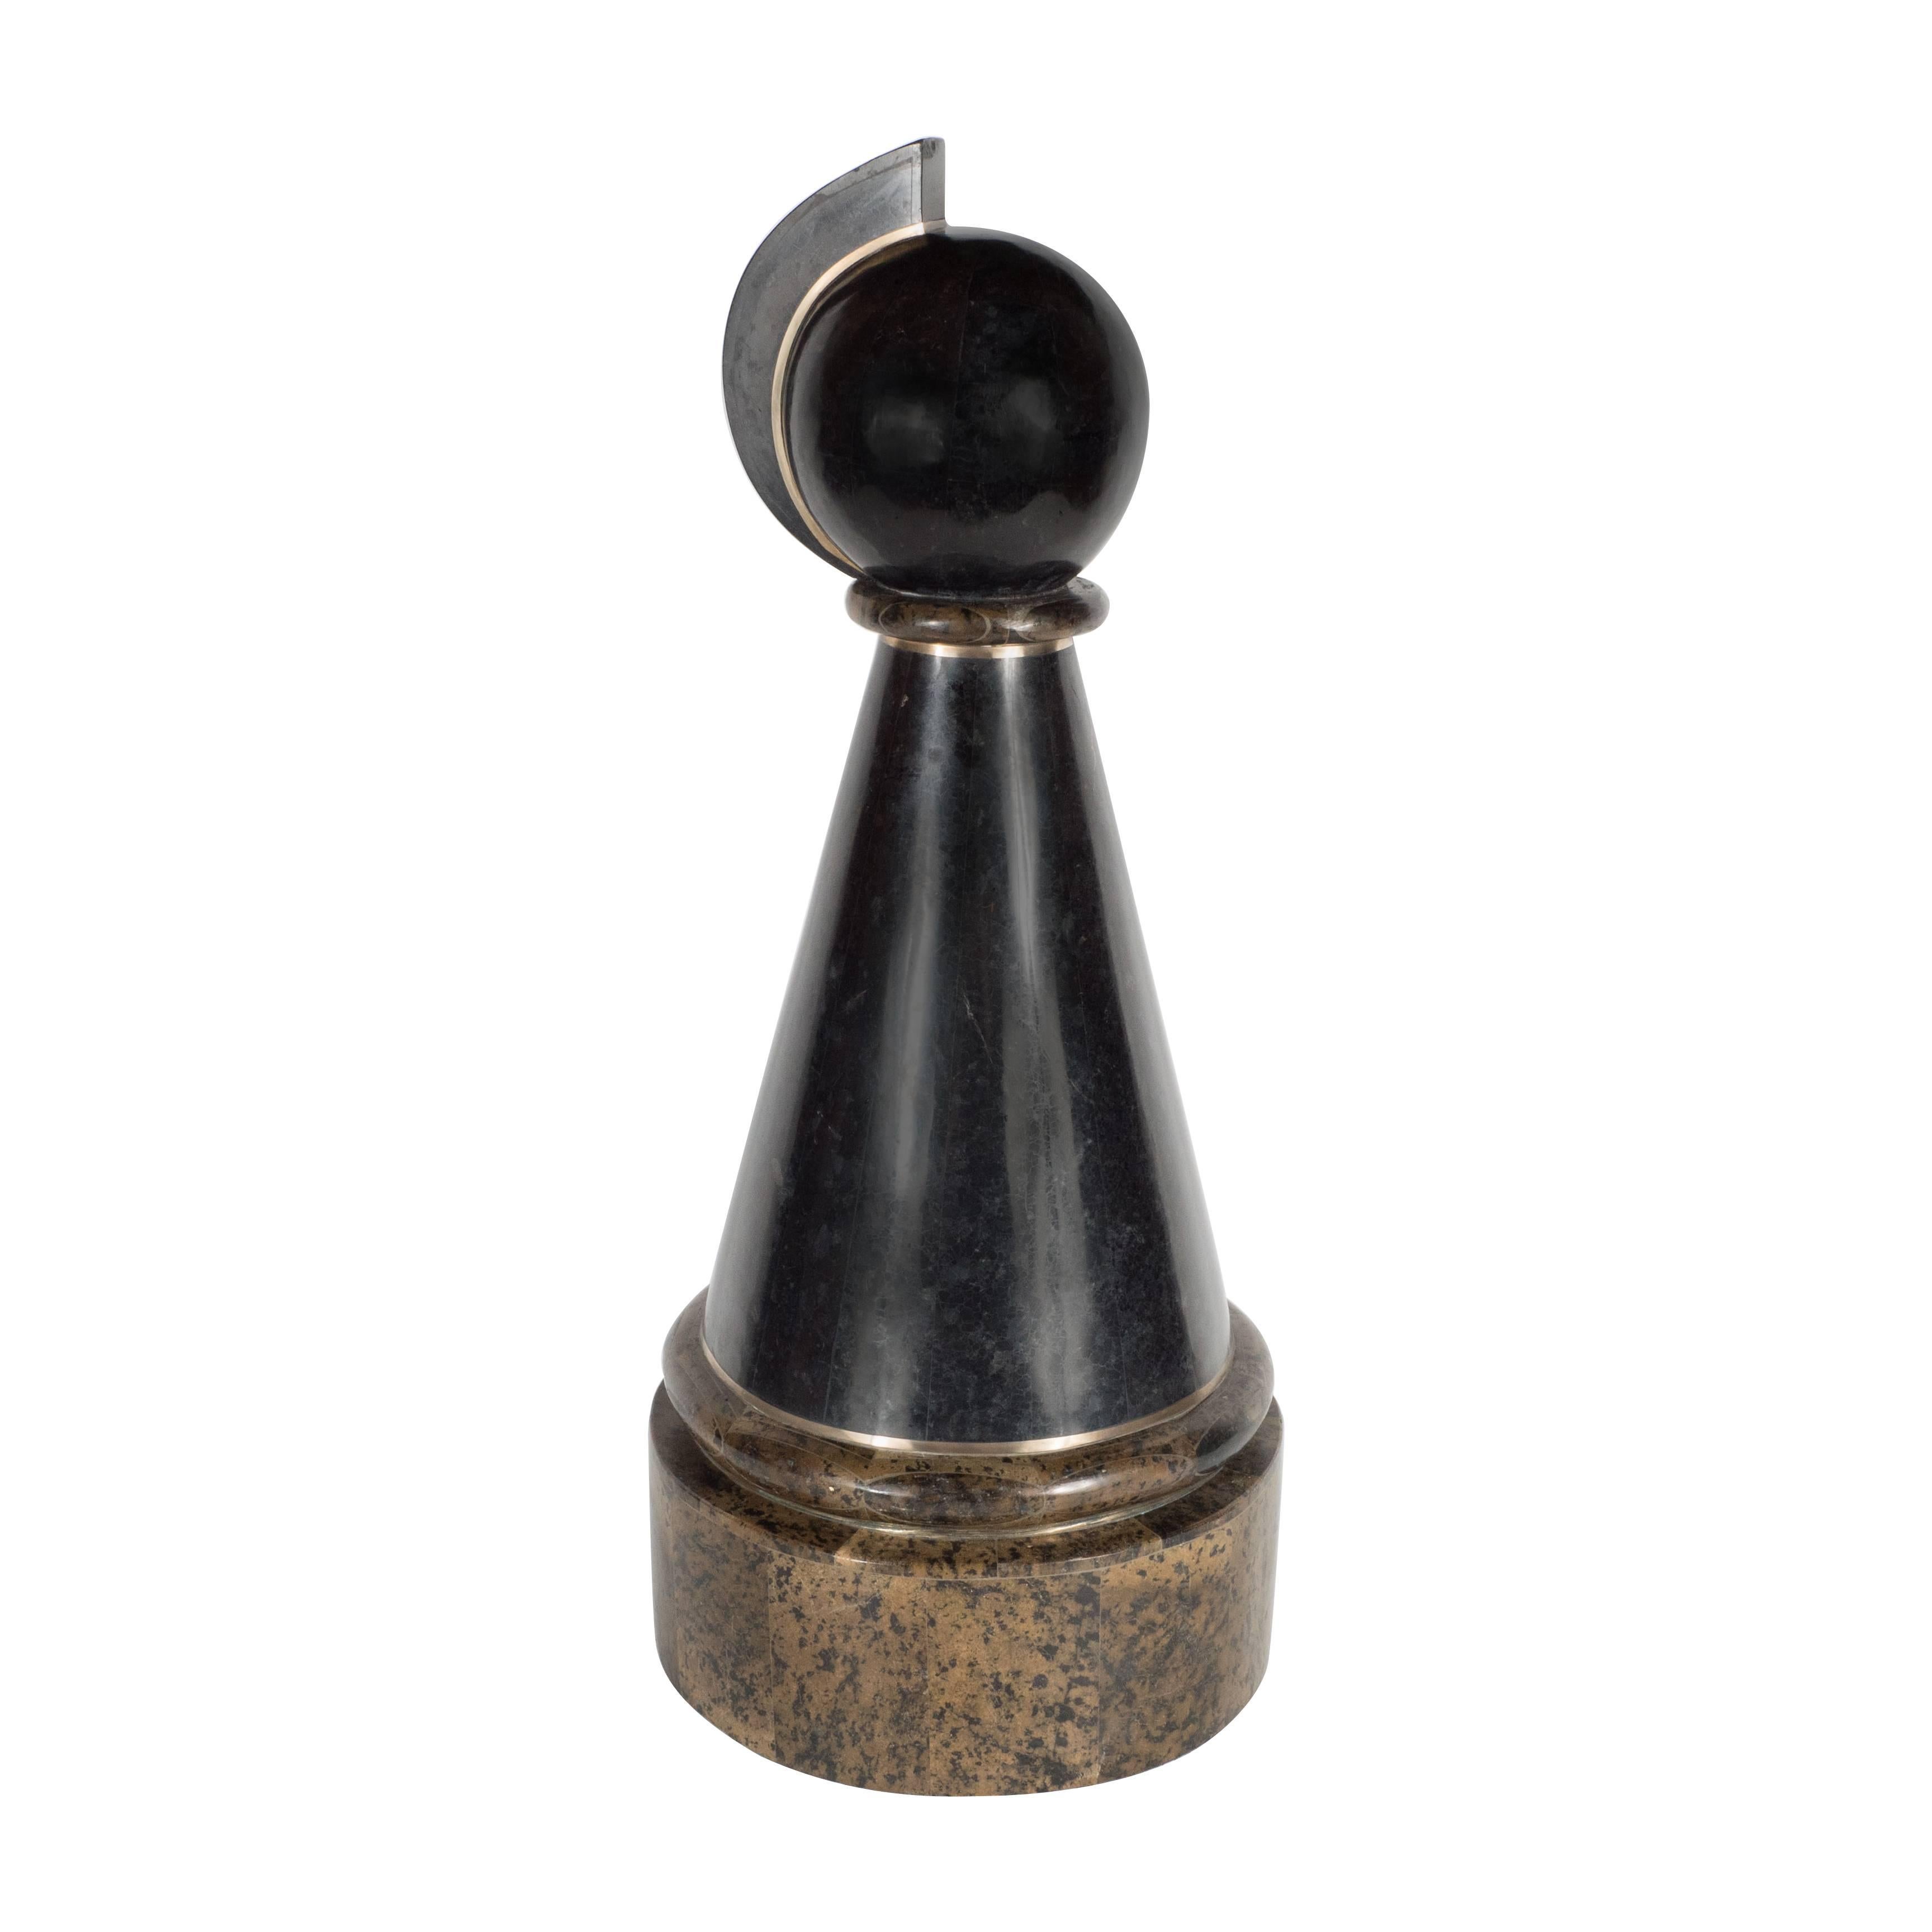 A Mid-Century modern chess piece by Maitland-Smith in various types of tessellated stone. Bands of brass inlay accentuate the piece. Vertical bands of black stone segments make up the conical body of the piece, which earth-toned shades cover the